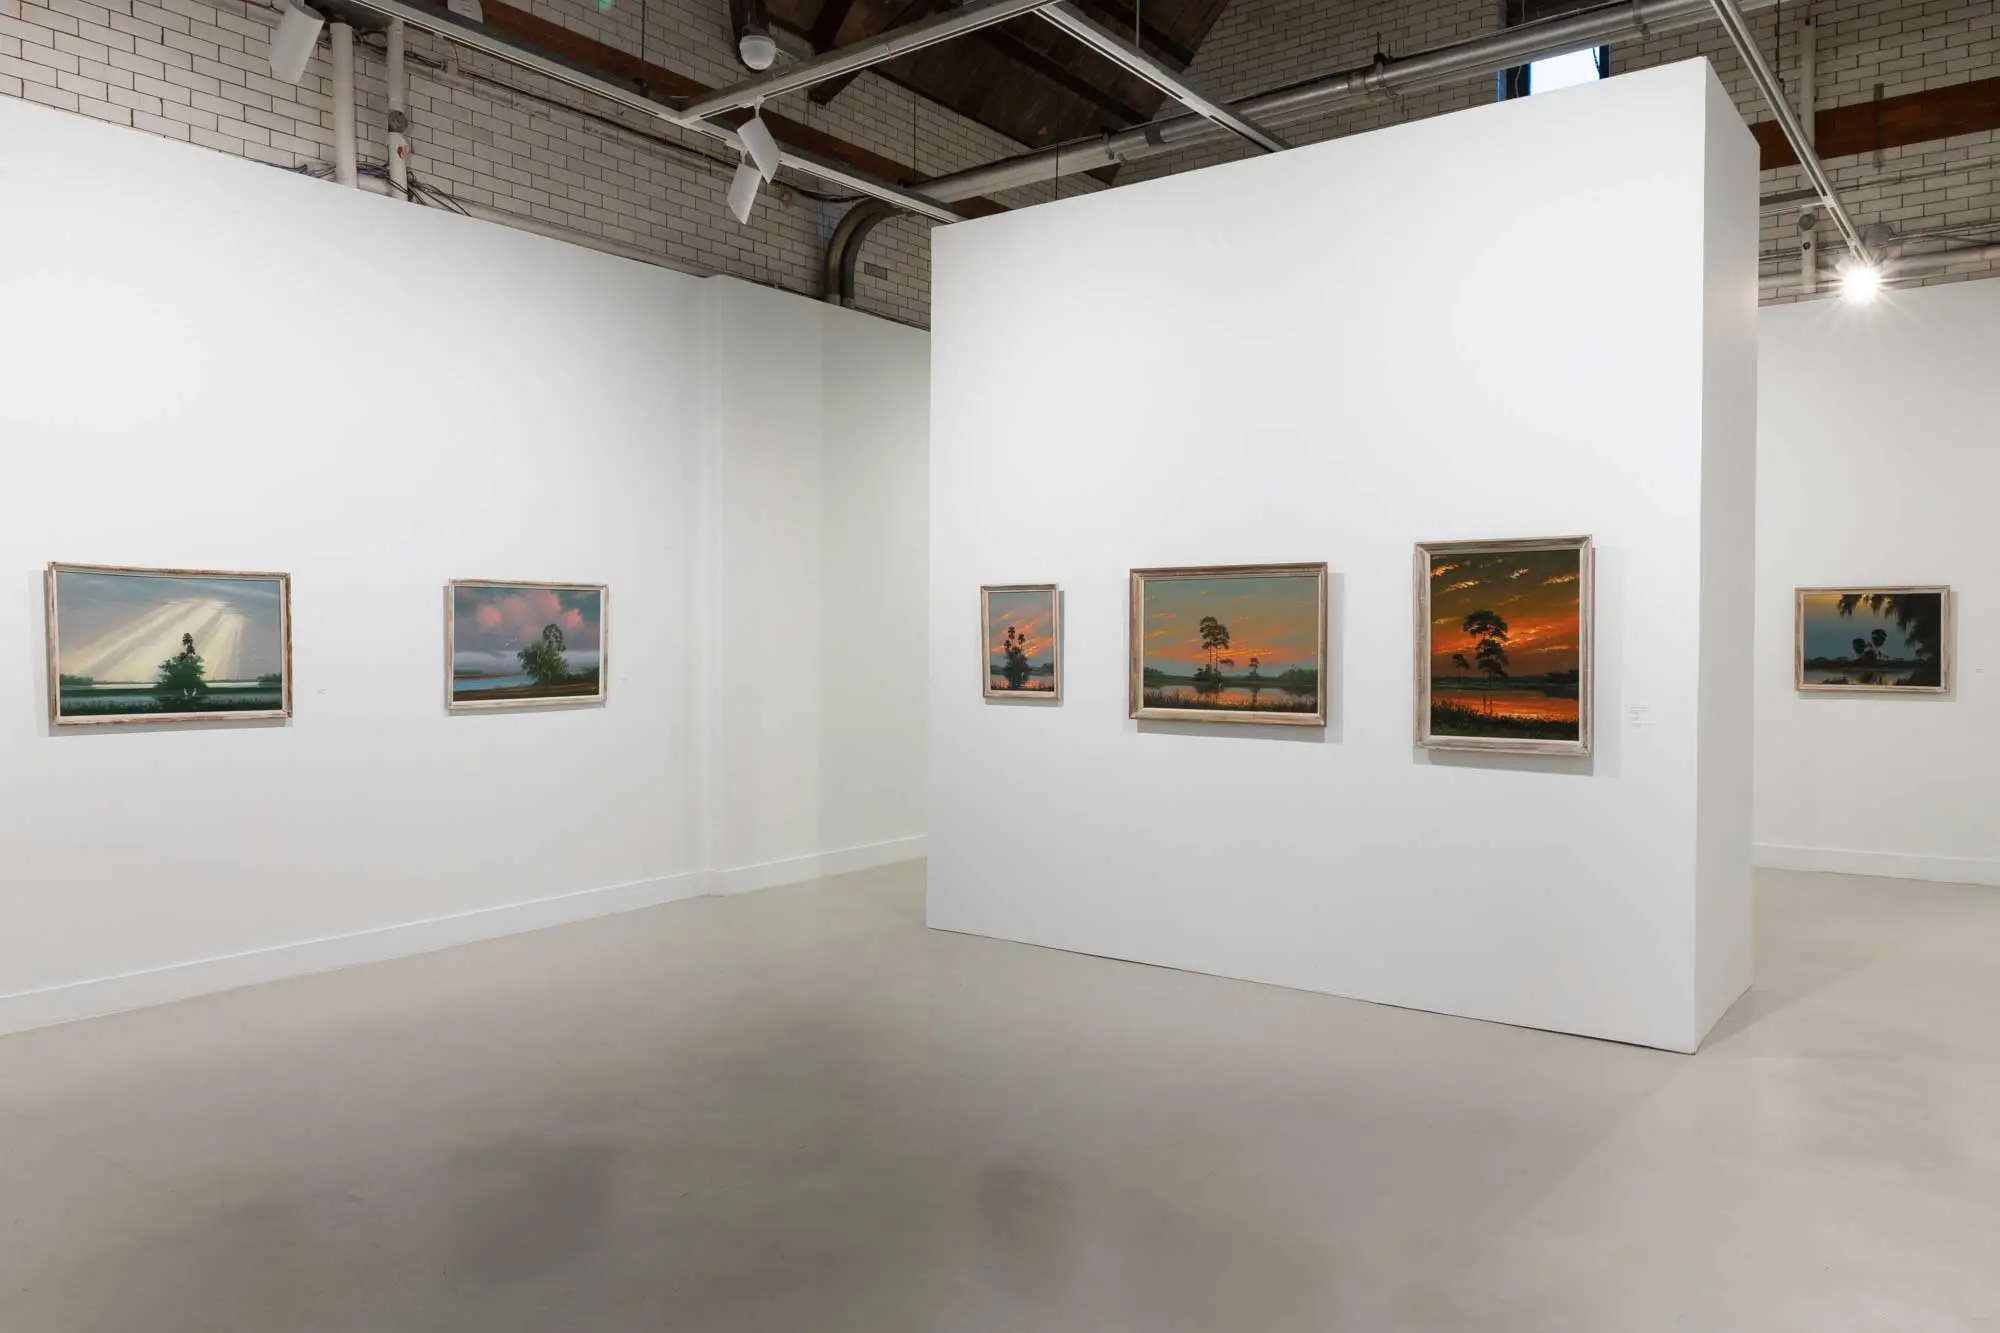 Installation view of Highwaymen: Fast Painting the American Dream, Spruance Gallery